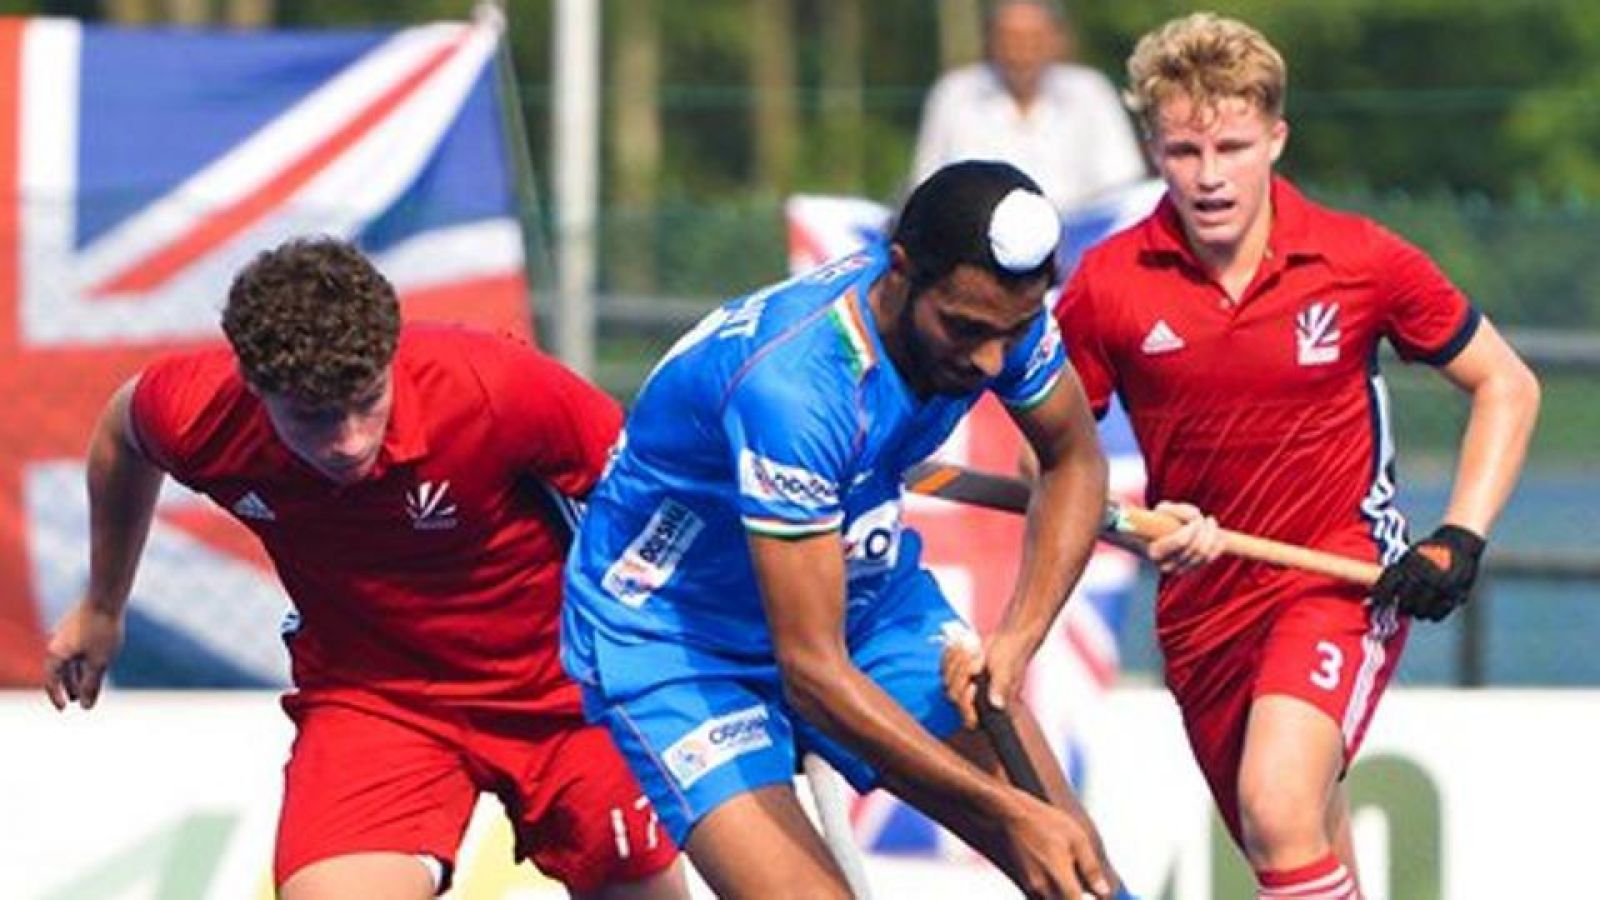 Sultan of Johor Cup India lost to Great Britain in the title match NewsTrack English 1